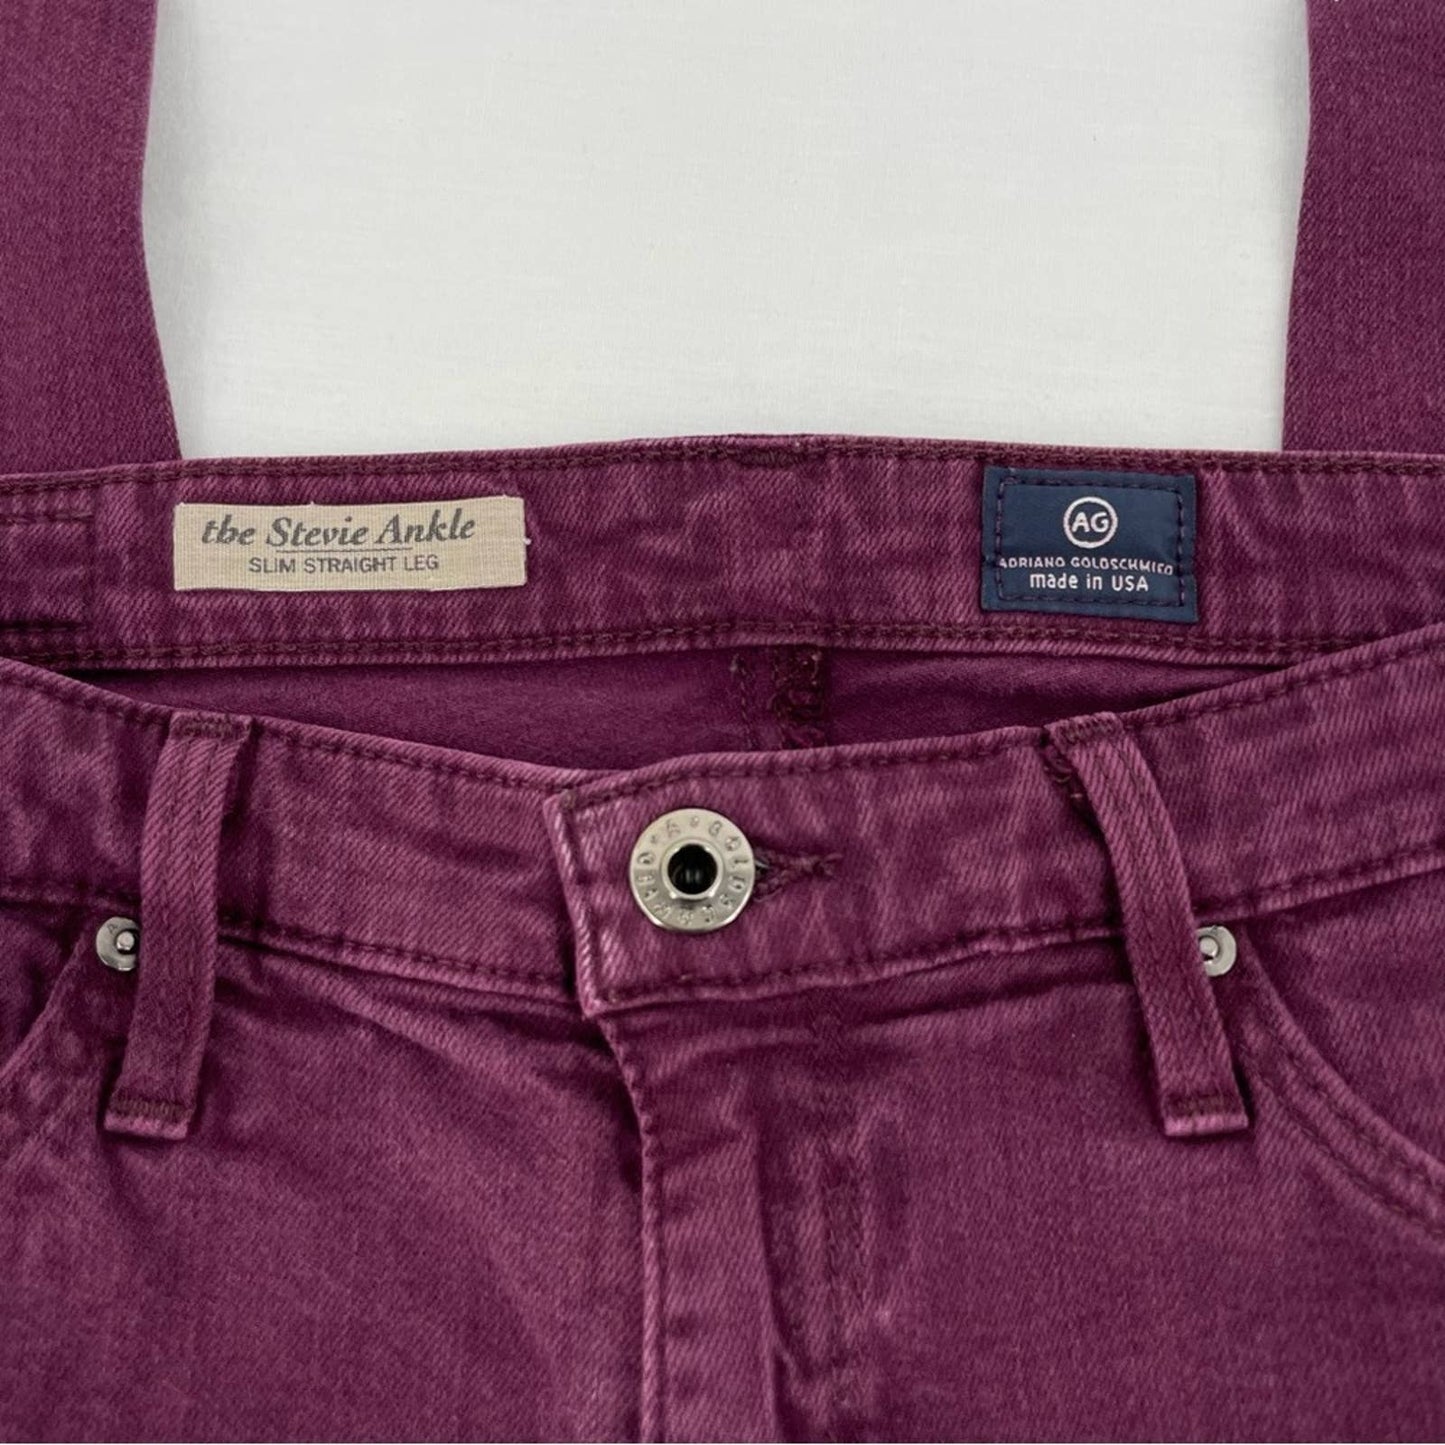 AG Adriano Goldschmied The Stevie Ankle Slim Straight Leg Purple Plum Jeans Size 27